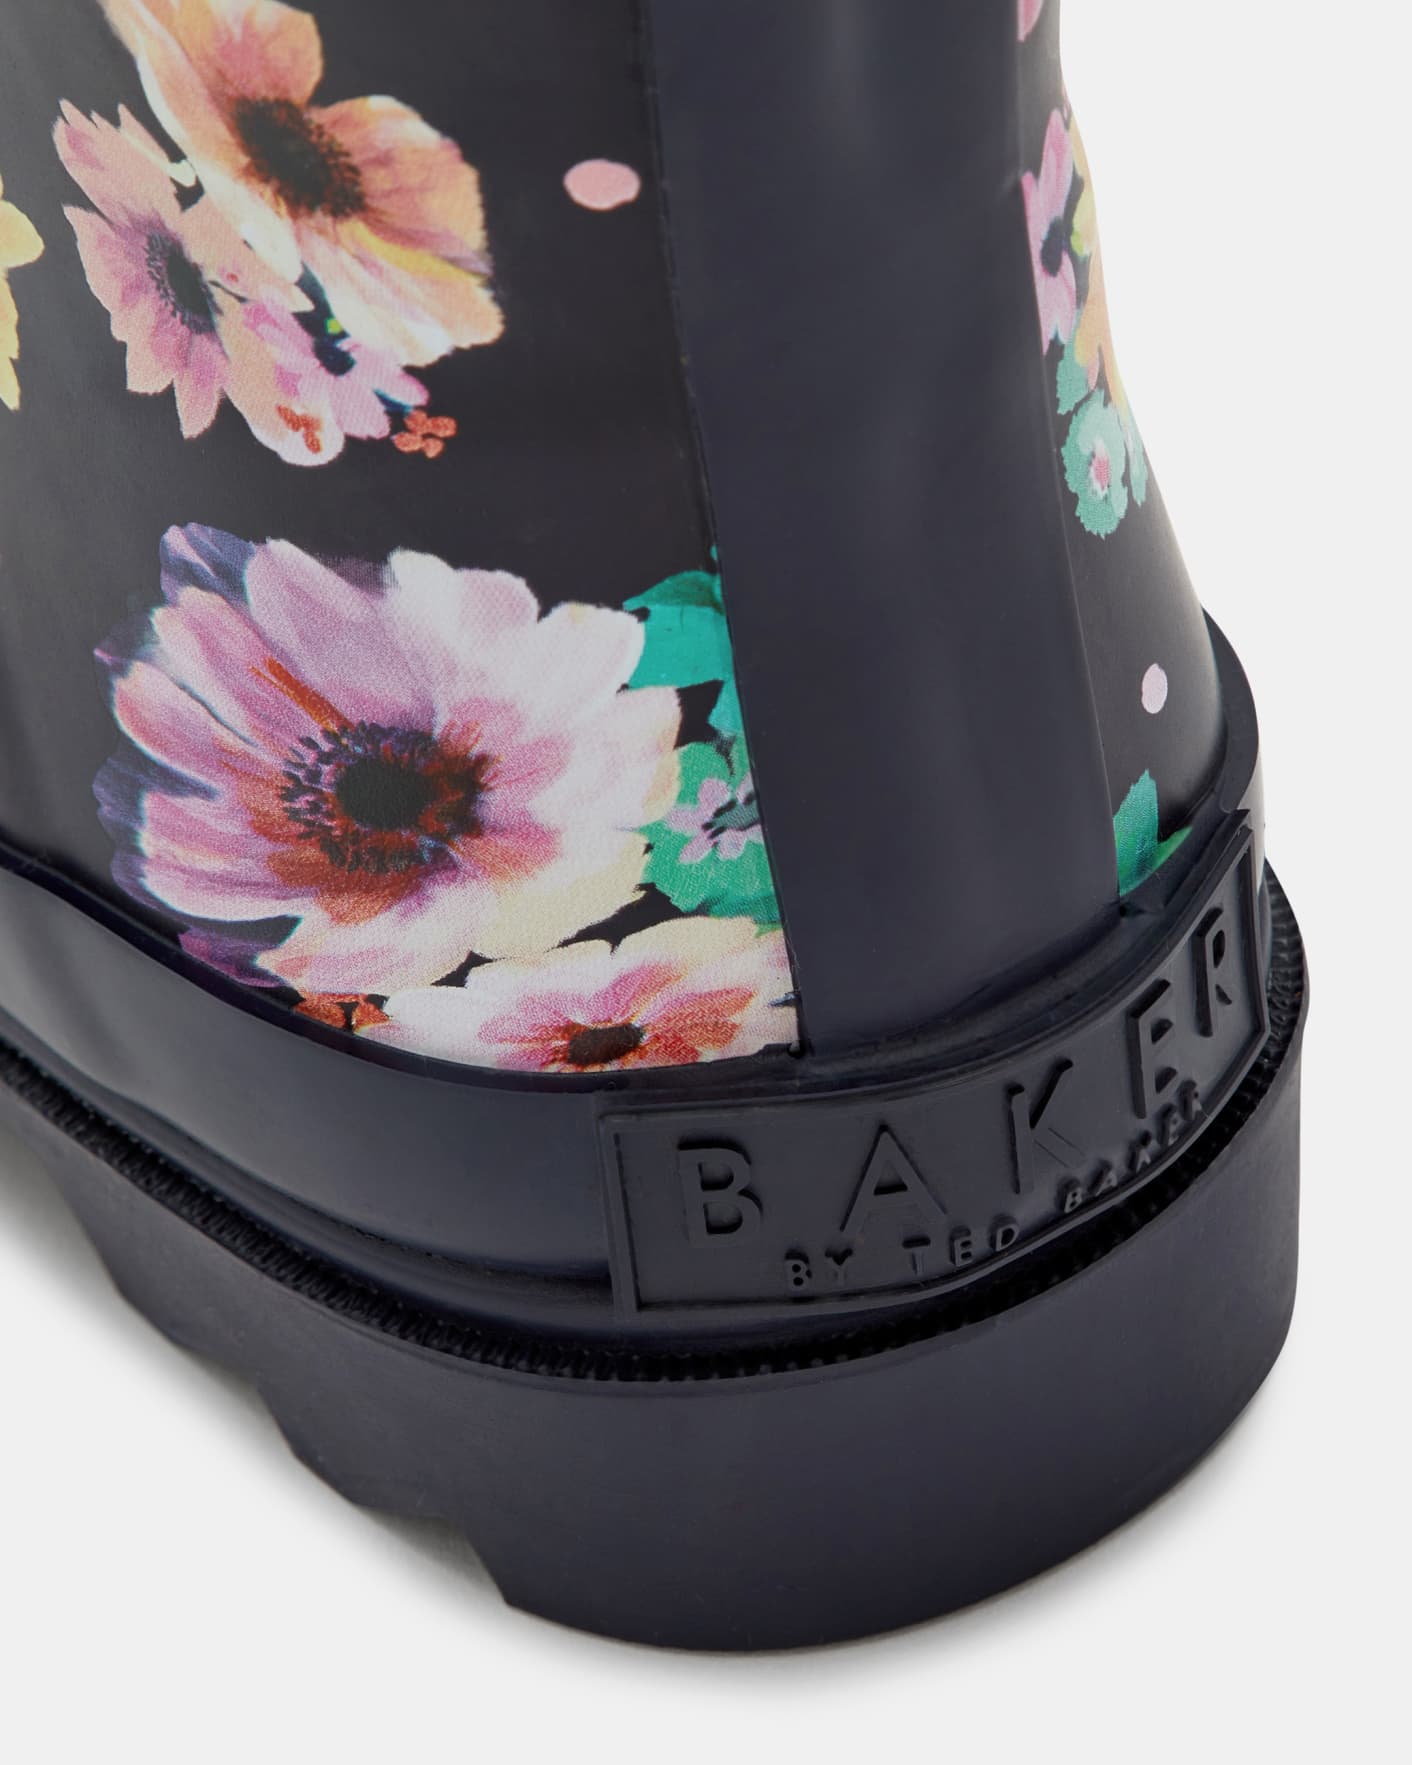 Marine Floral Wellies Ted Baker